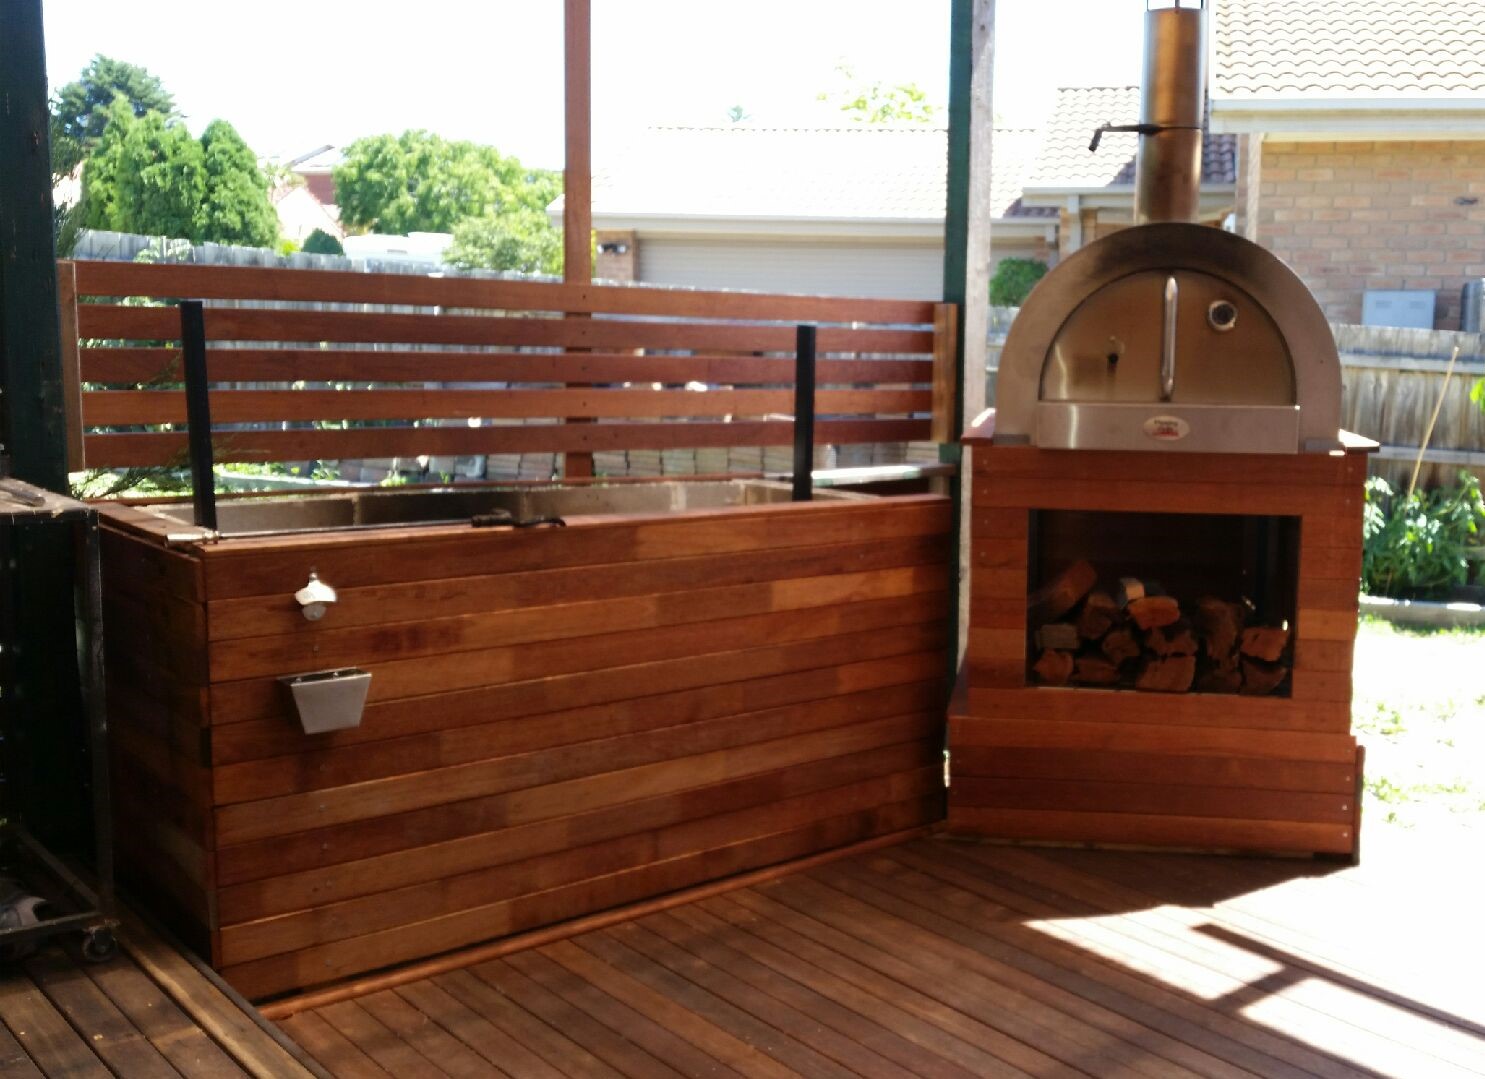 This image shows how a customer purchased a flaming coals woodfired pizza oven and built it into his kitchen